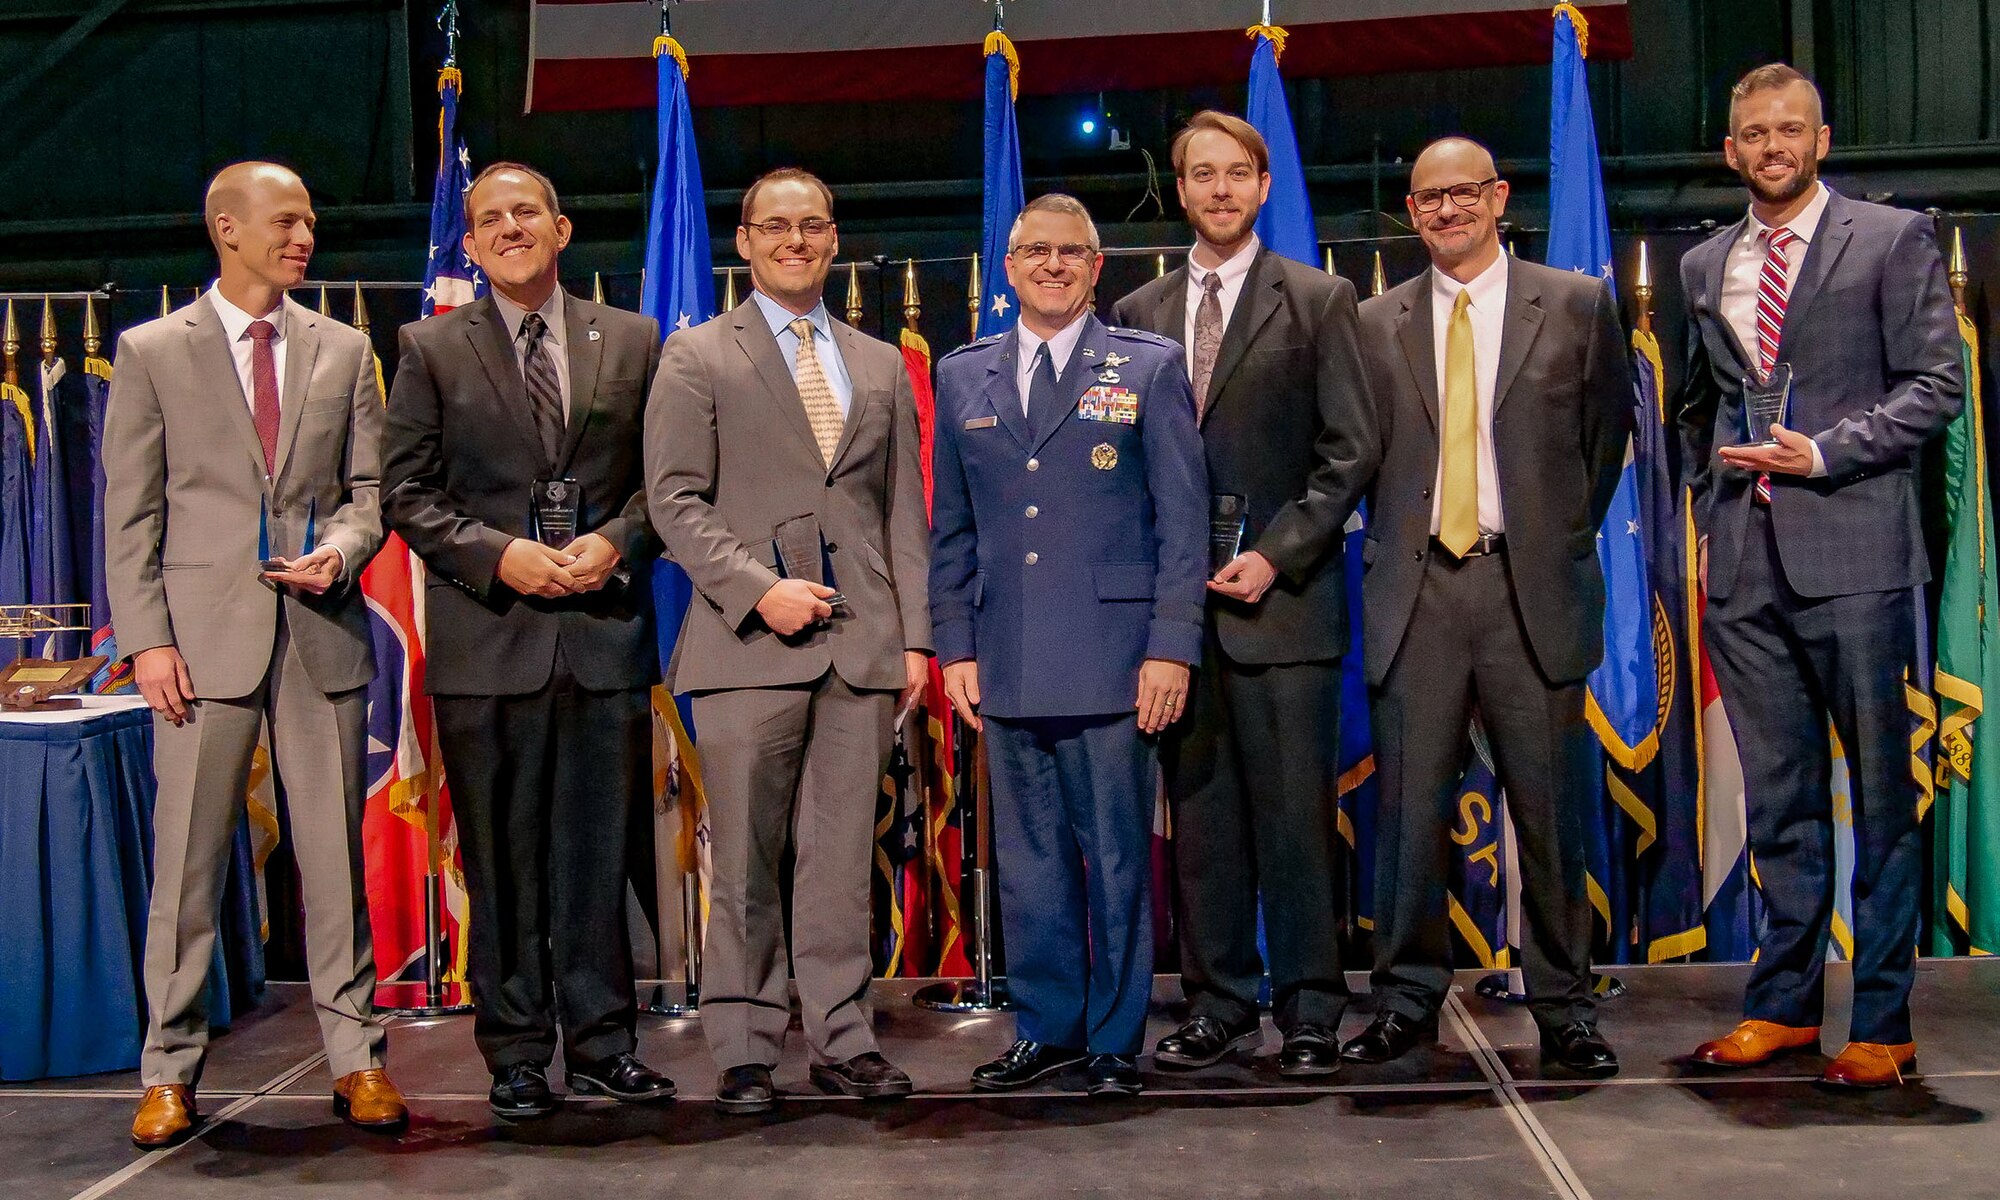 Five scientists and engineers were recognized with the Science and Engineering Early Career Award during the 2018 AFRL Fellows and Science and Engineering Early Career Awards Banquet held at the National Museum of the United States Air Force Oct. 25. The AFRL Science and Engineering Early Career Award honors AFRL’s most promising young scientists and engineers for exceptional leadership potential and mission contributions early in their research careers. (U.S. Air Force photo/Keith Lewis)